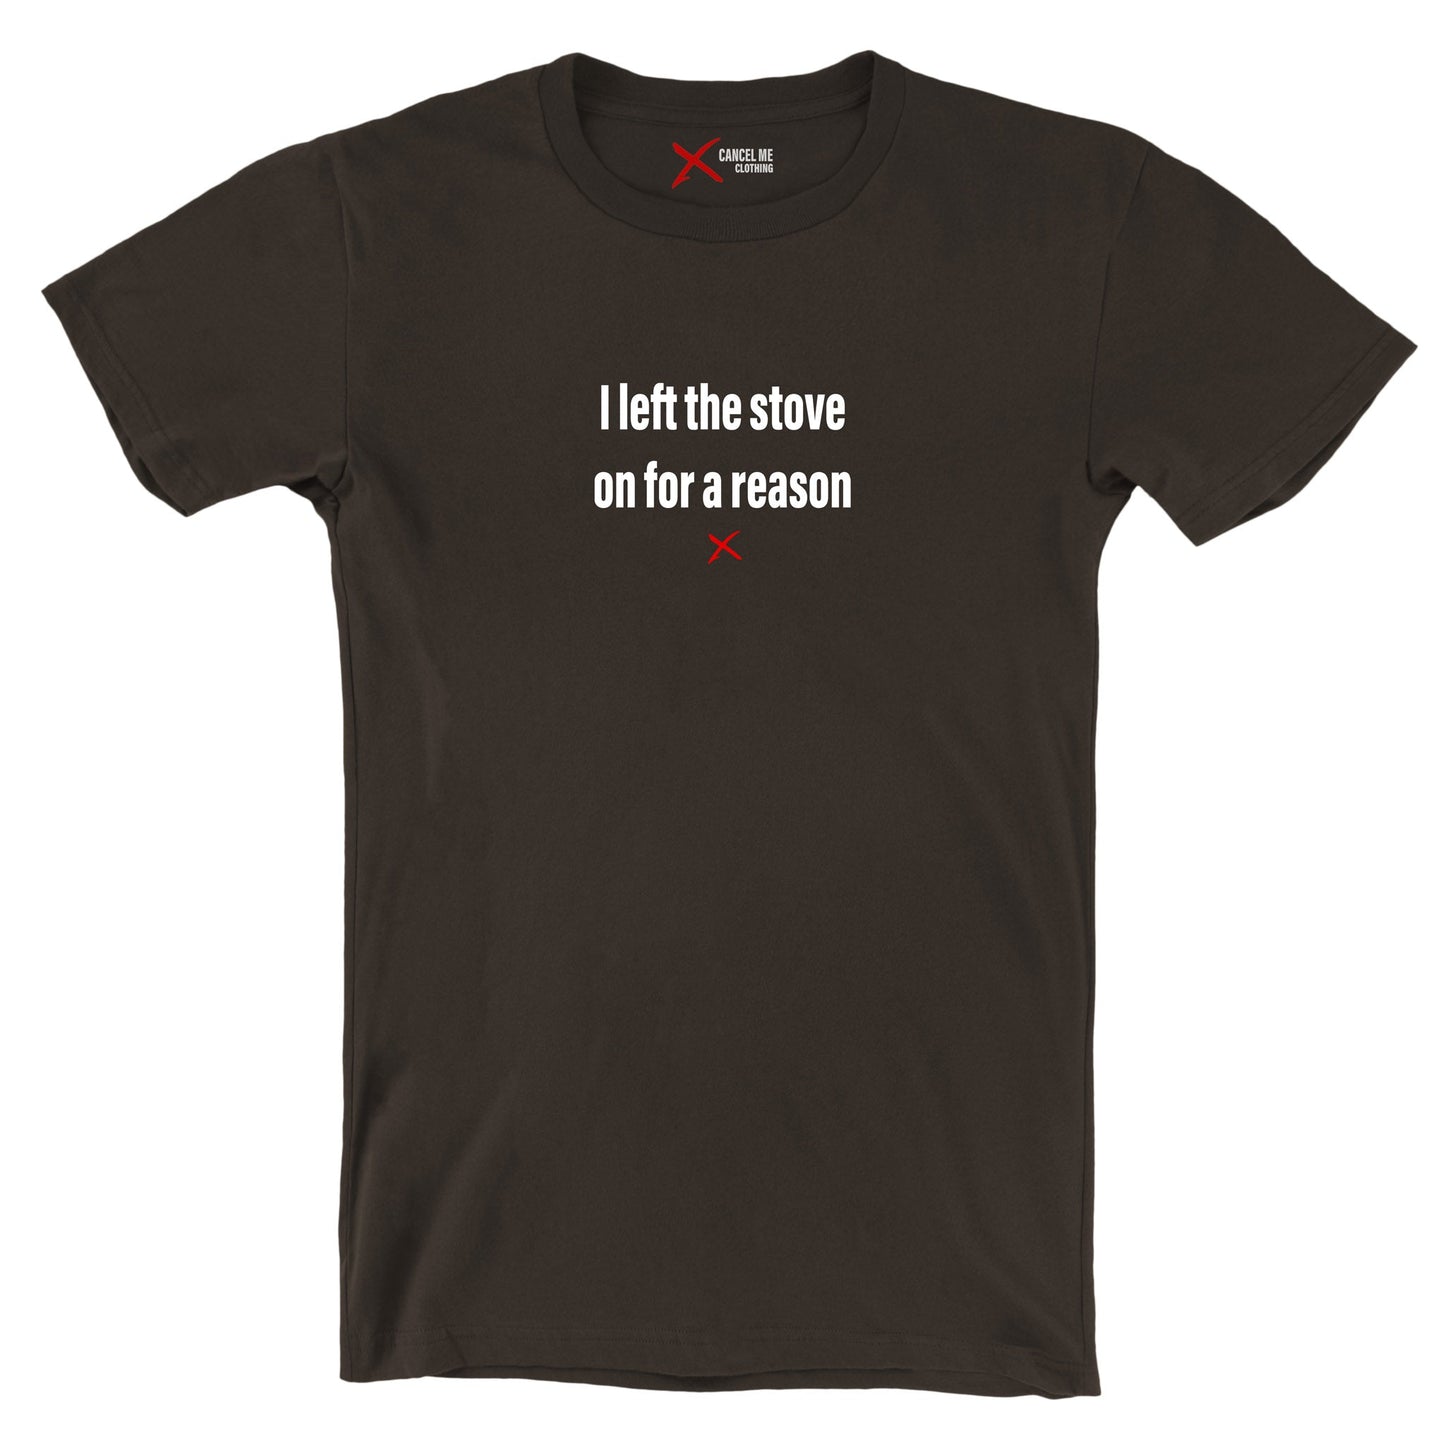 I left the stove on for a reason - Shirt